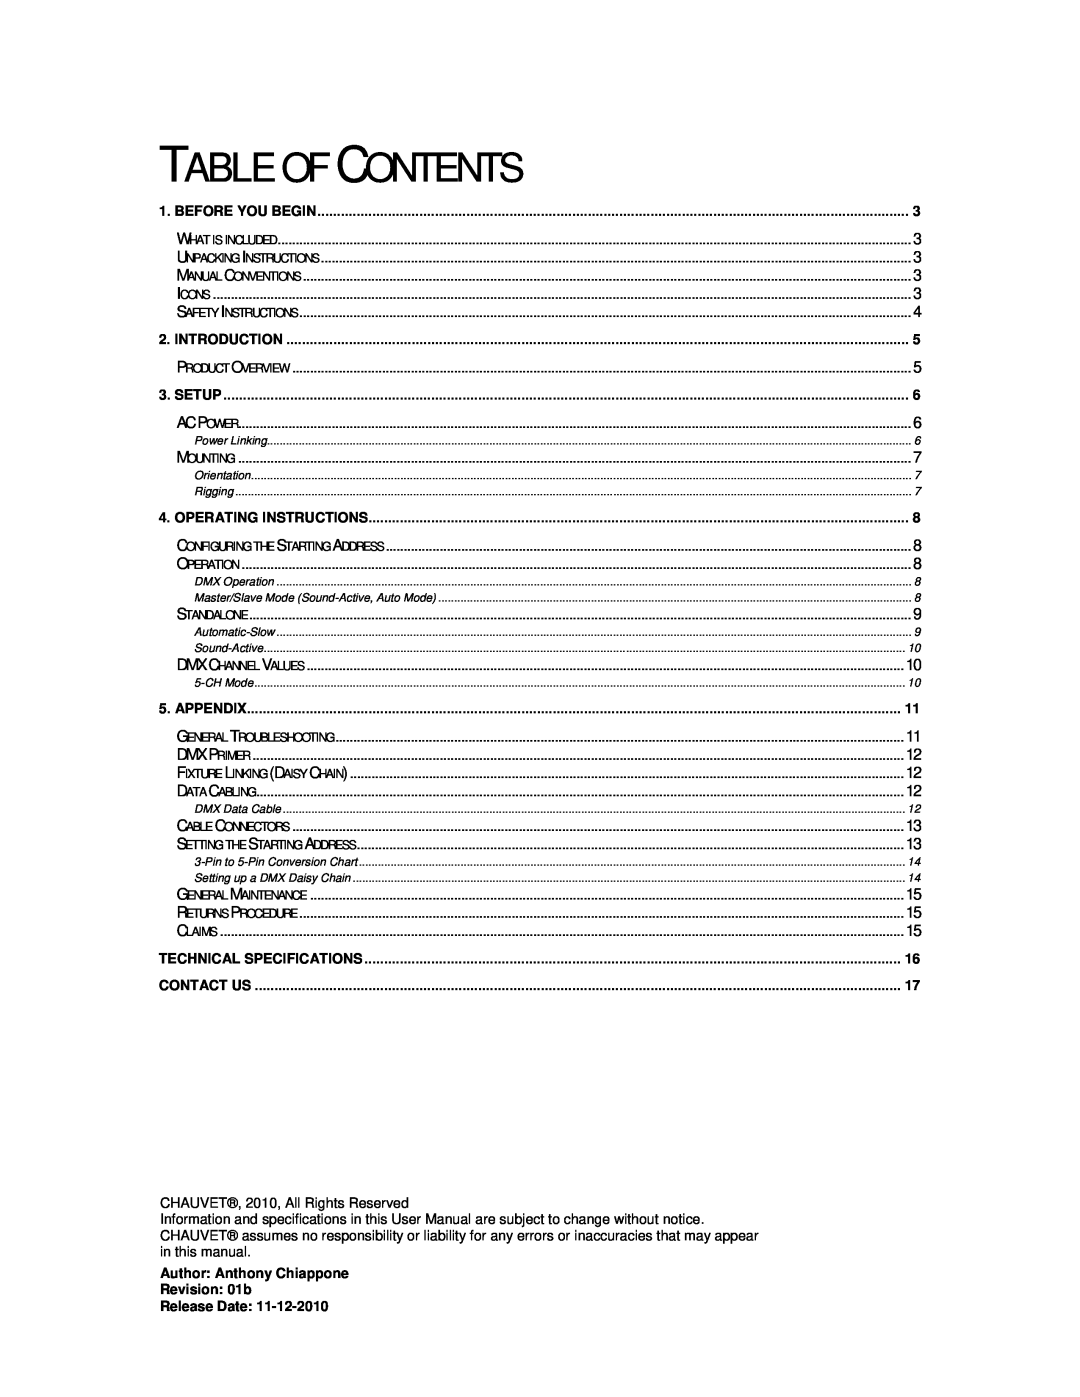 Chauvet SCAN LED 100 user manual Table Of Contents, Before You Begin, Author Anthony Chiappone Revision 01b, Release Date 